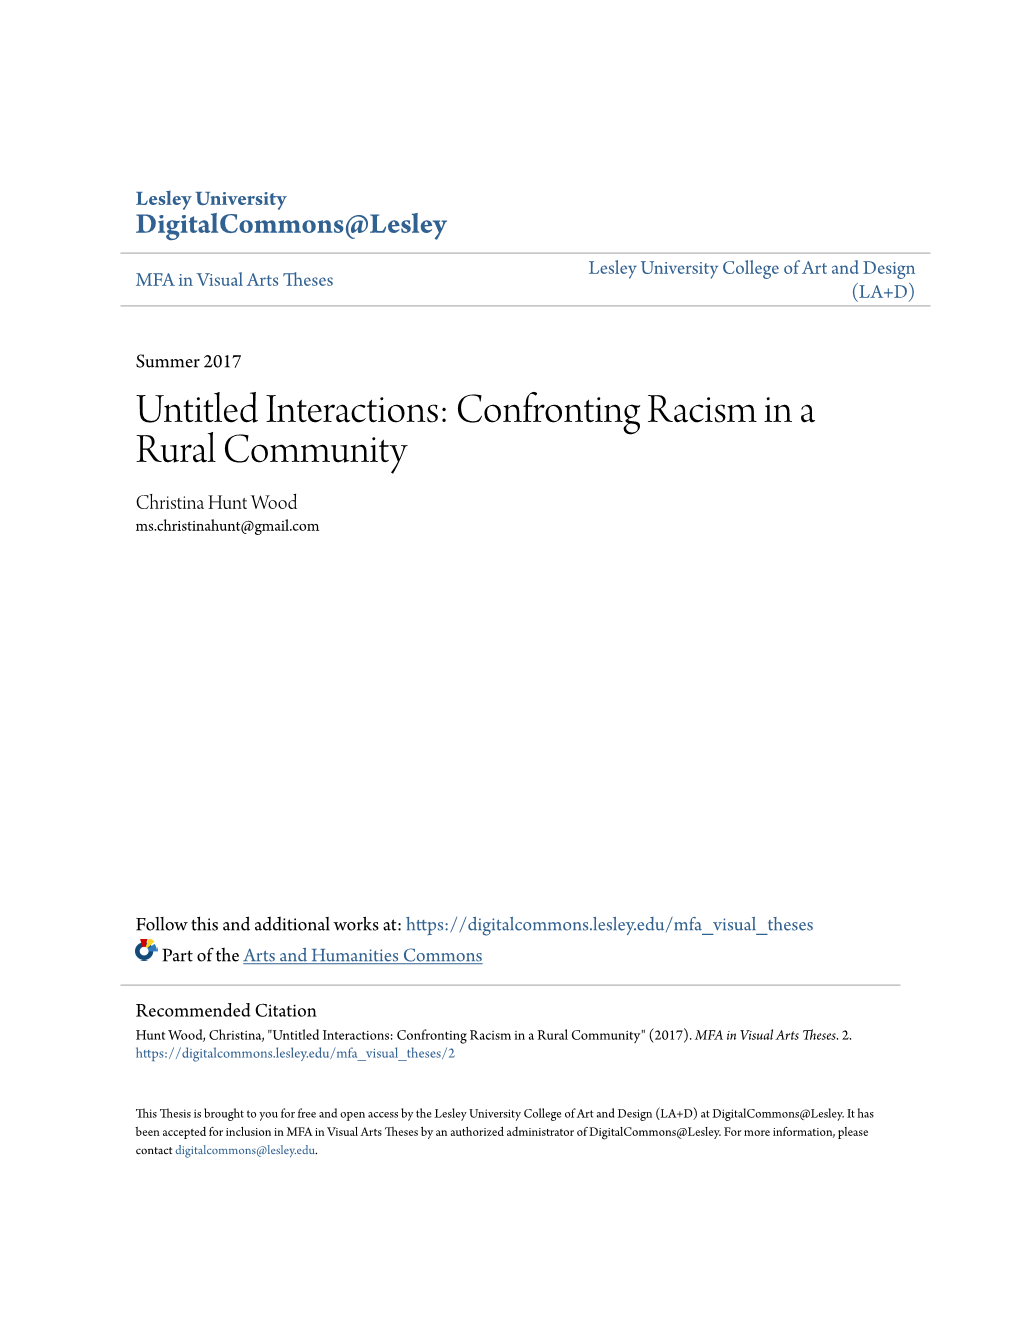 Untitled Interactions: Confronting Racism in a Rural Community Christina Hunt Wood Ms.Christinahunt@Gmail.Com